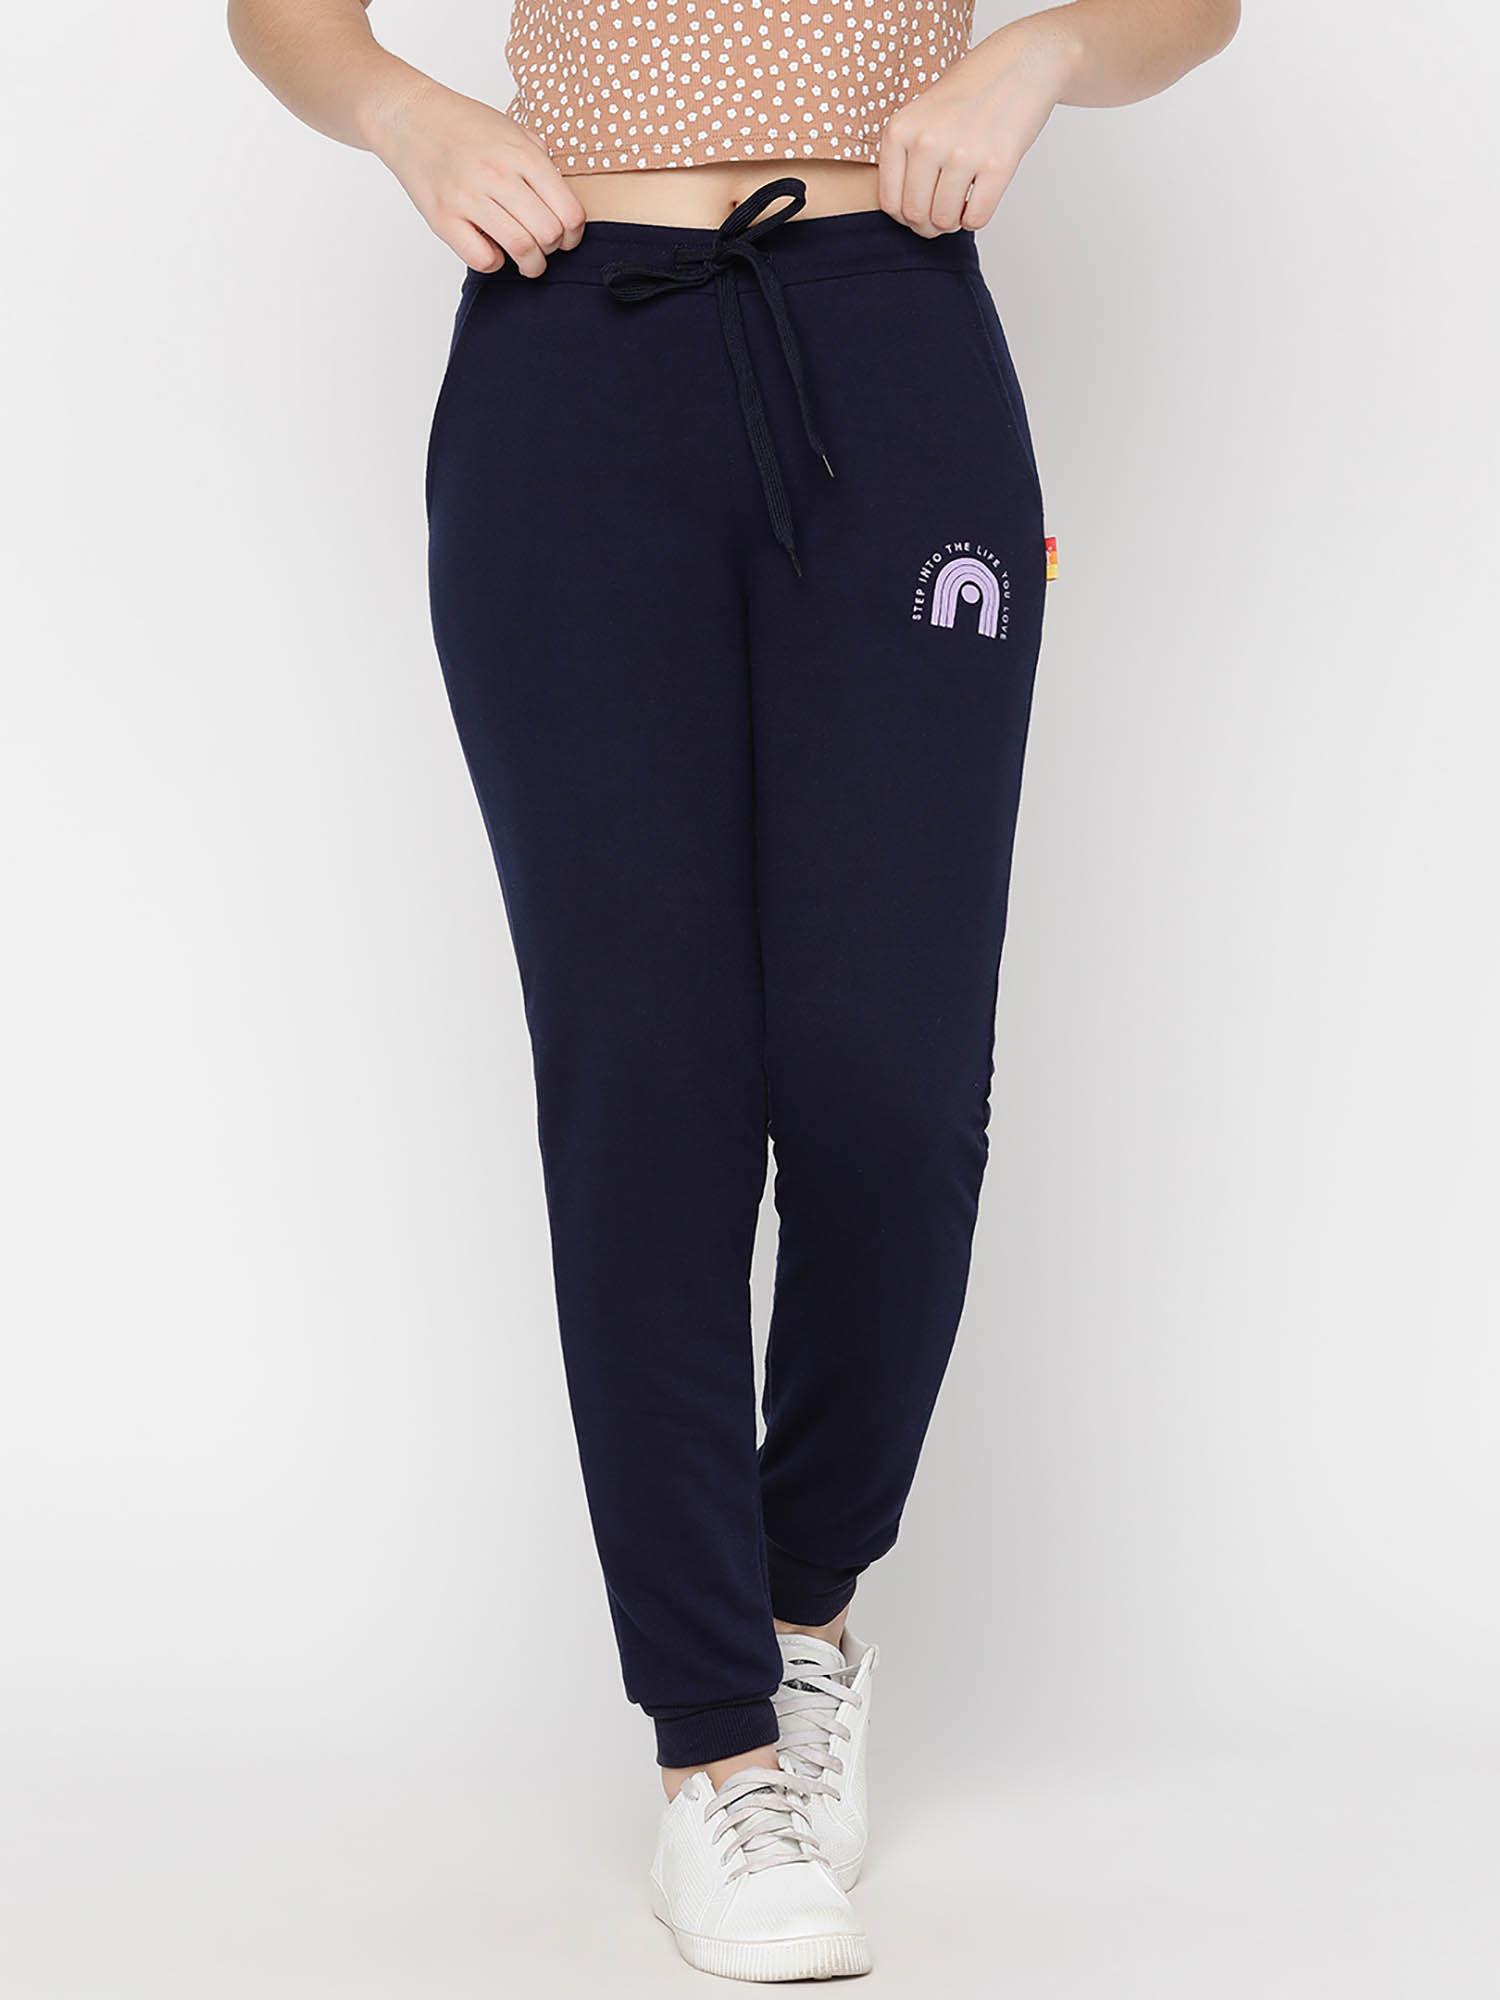 girls printed light weight cotton looper joggers-navy blue